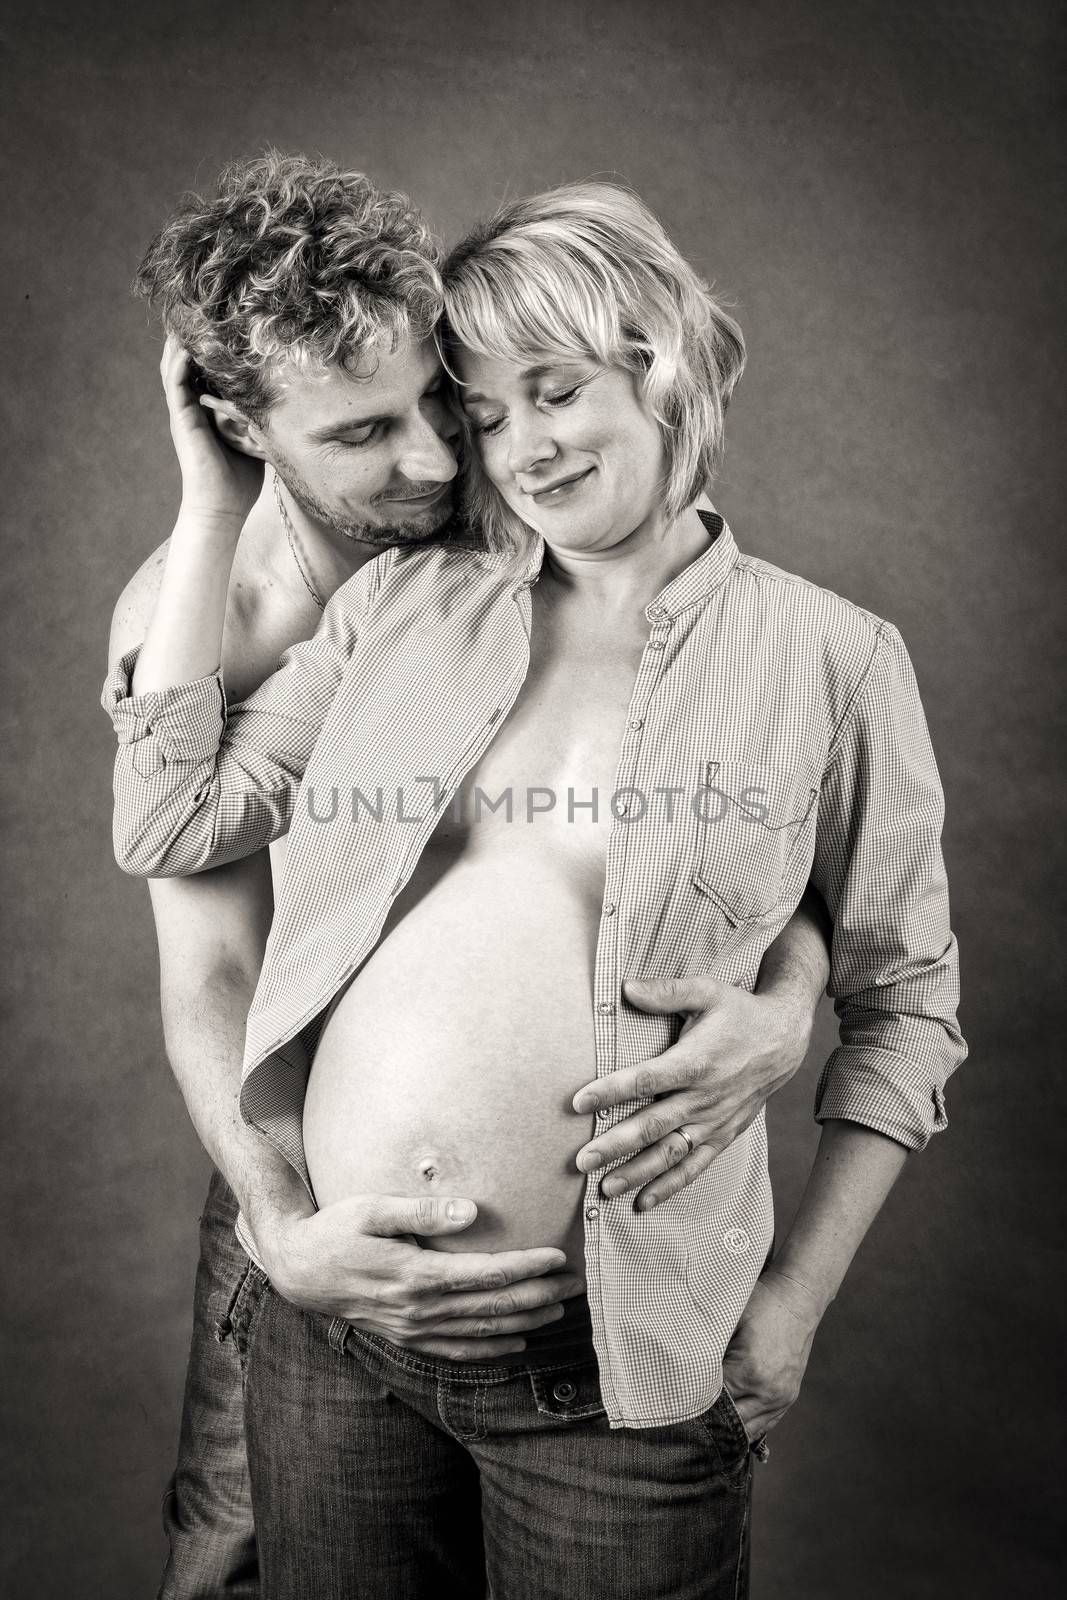 Loving happy couple, pregnant woman with her husband, black and white, romantic scene